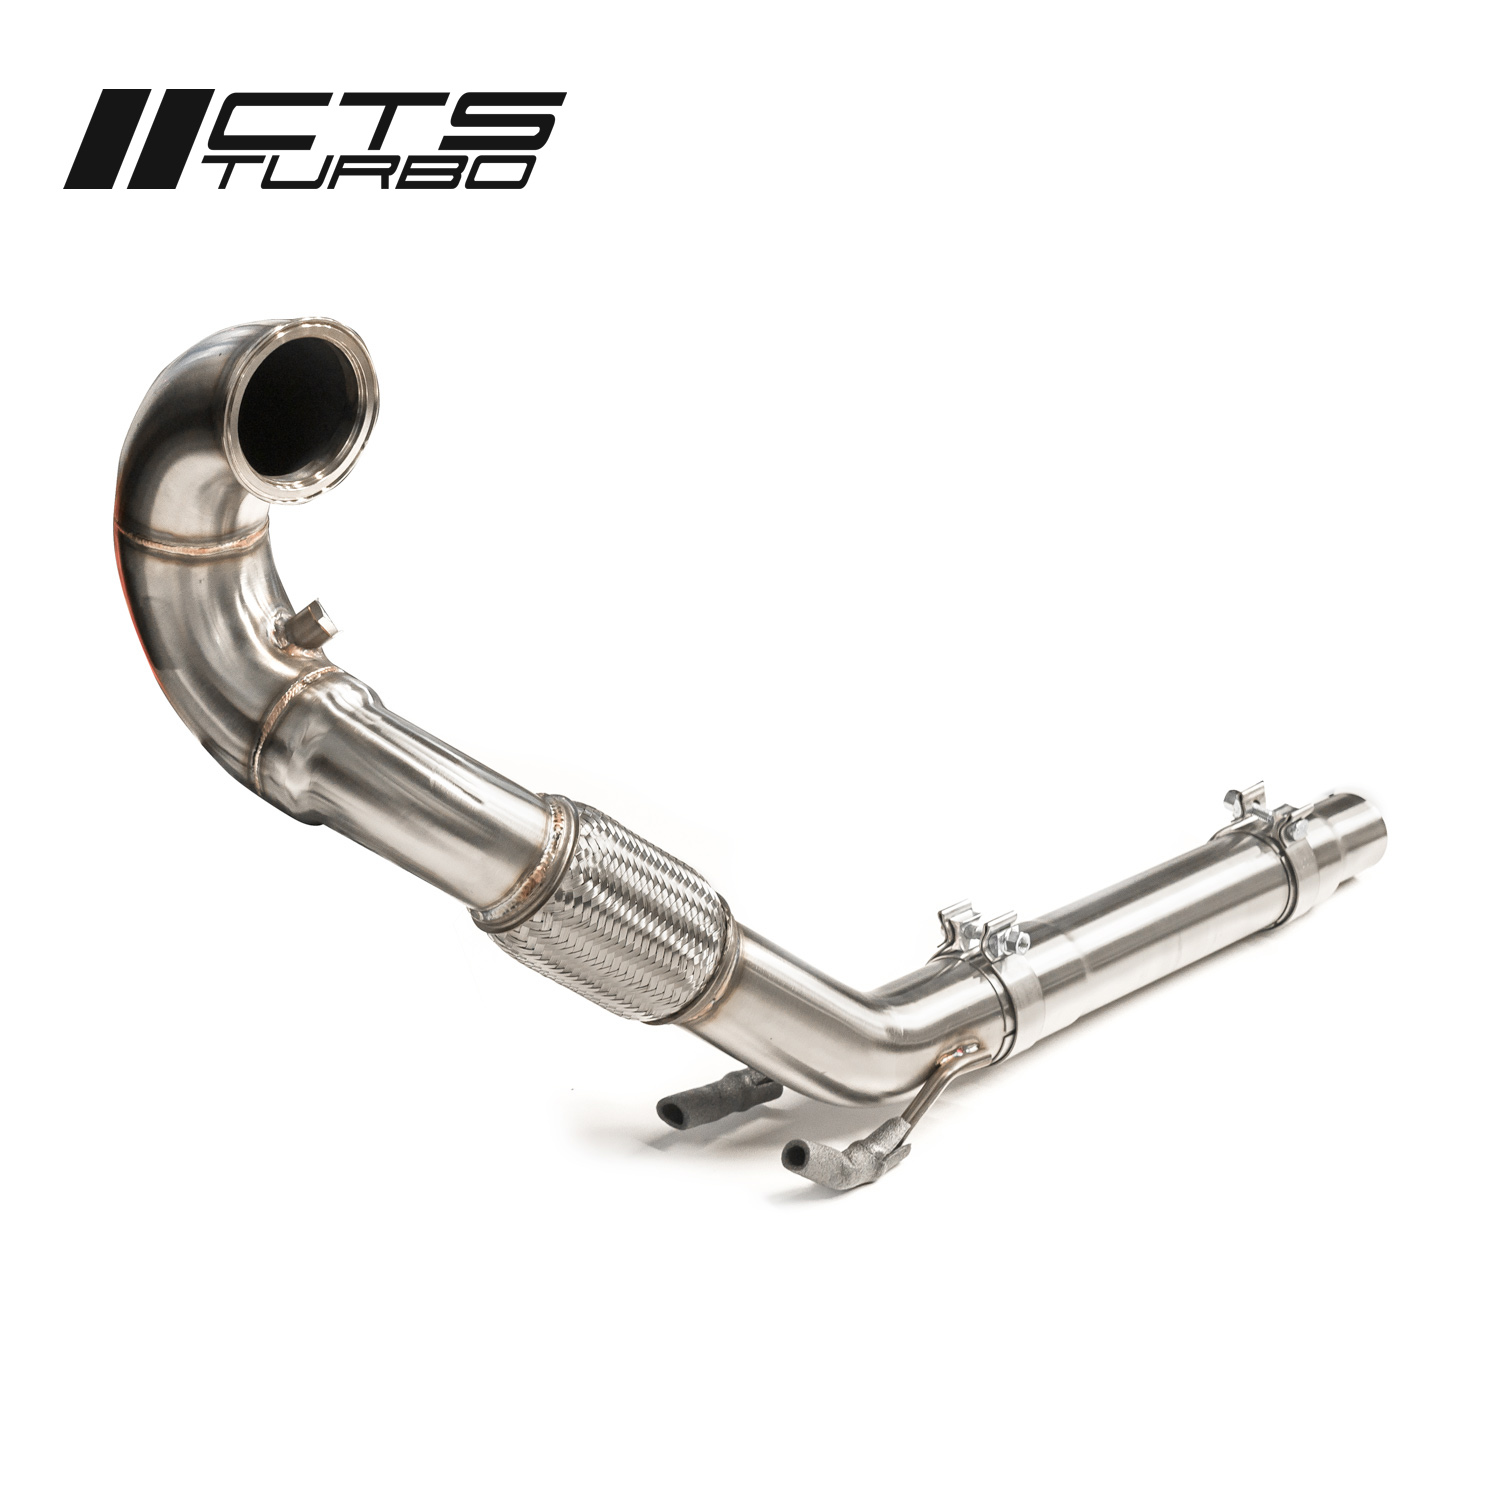 Cts Turbo Mqb Fwd Exhaust Downpipe Cts Turbo